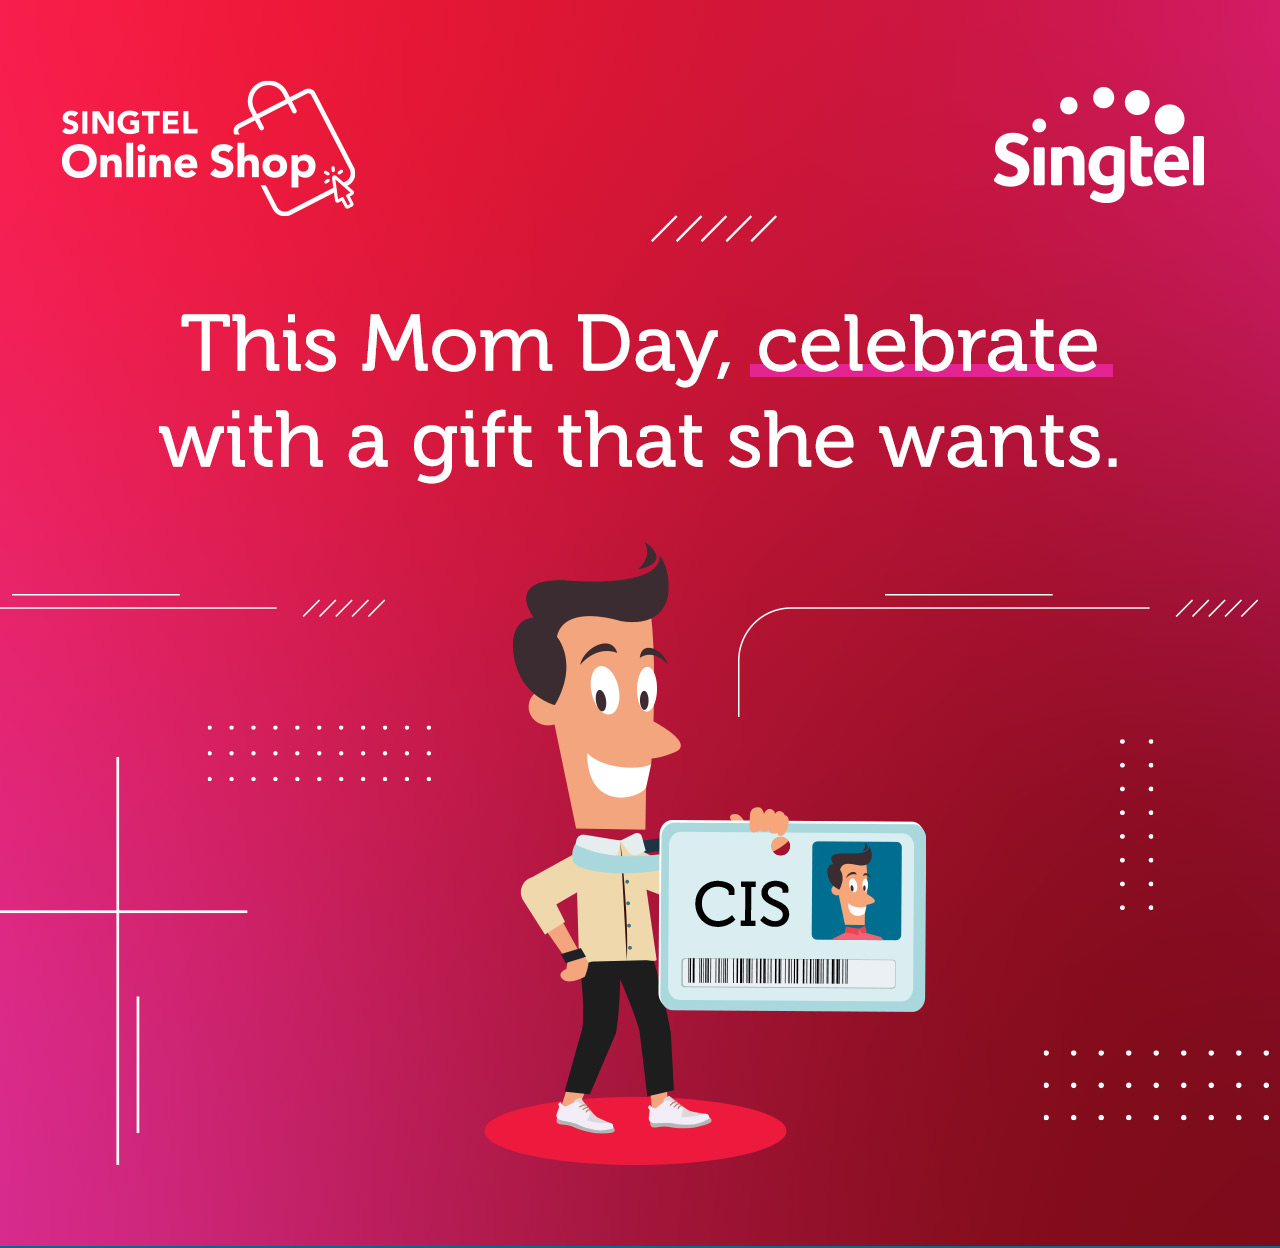 This Mom Day, celebrate with a gift that she wants.